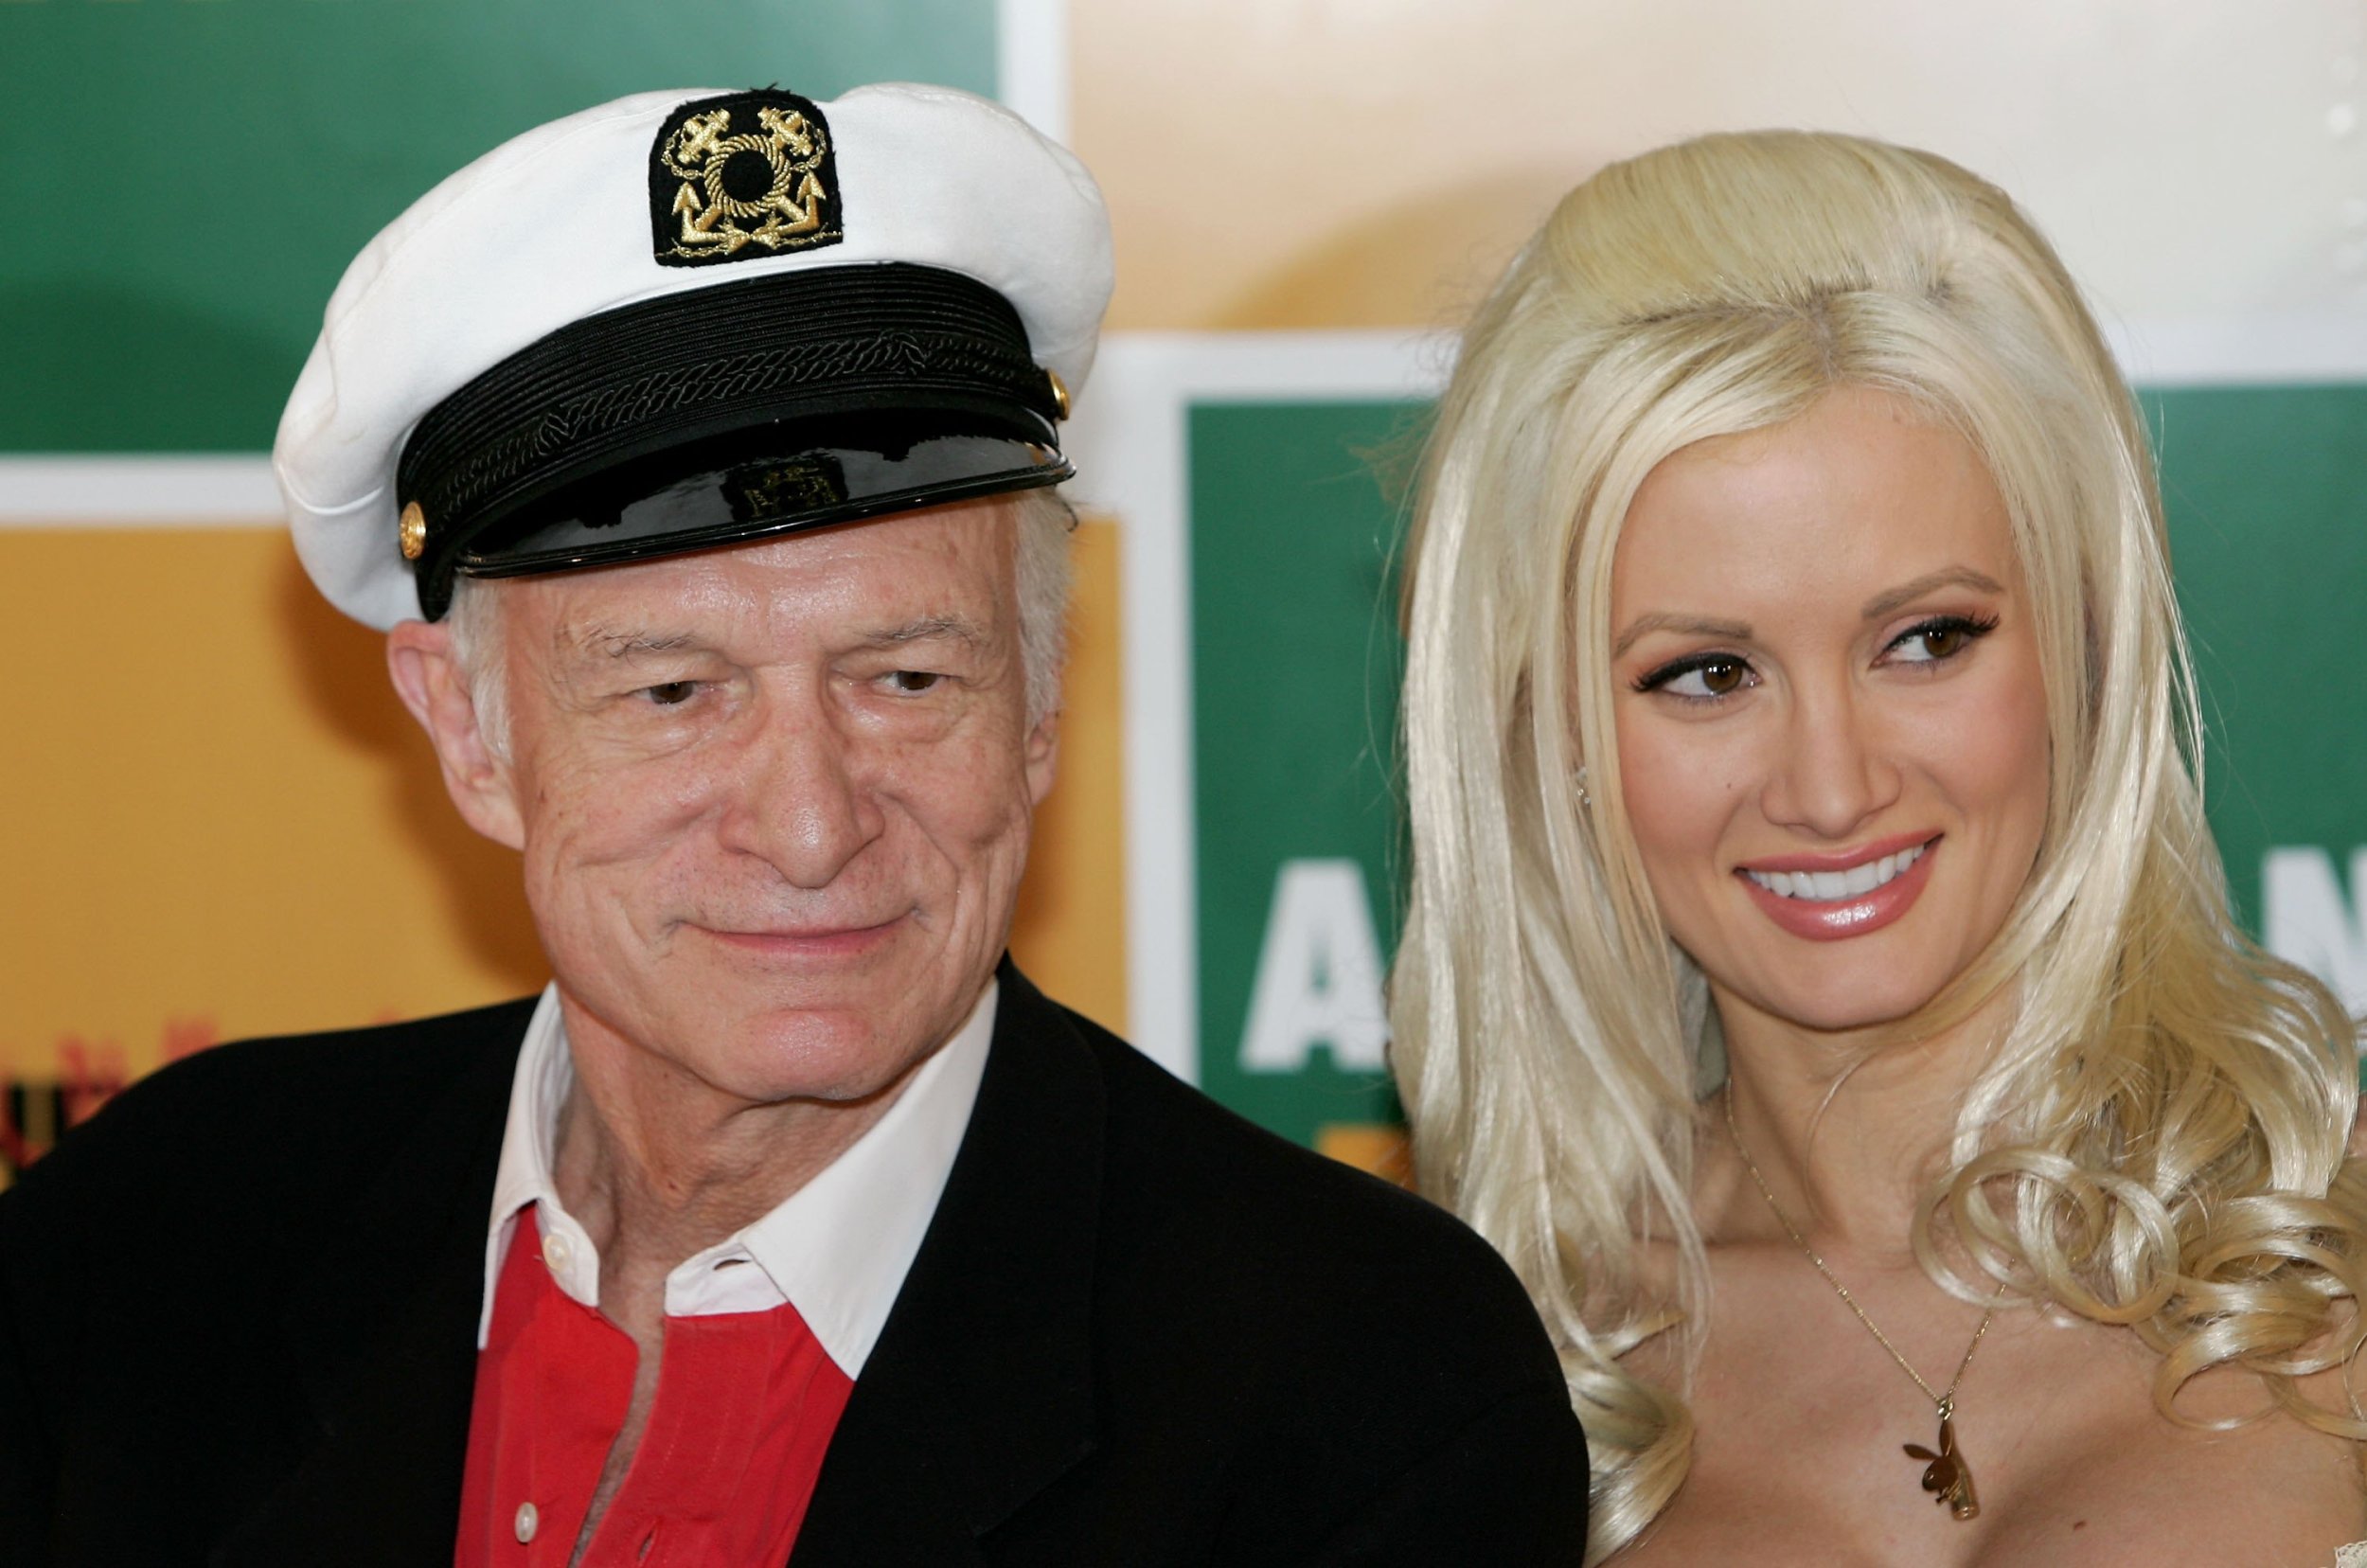 Holly Madisons 8 Most Damning Comments About Hugh Hefner IBTimes image